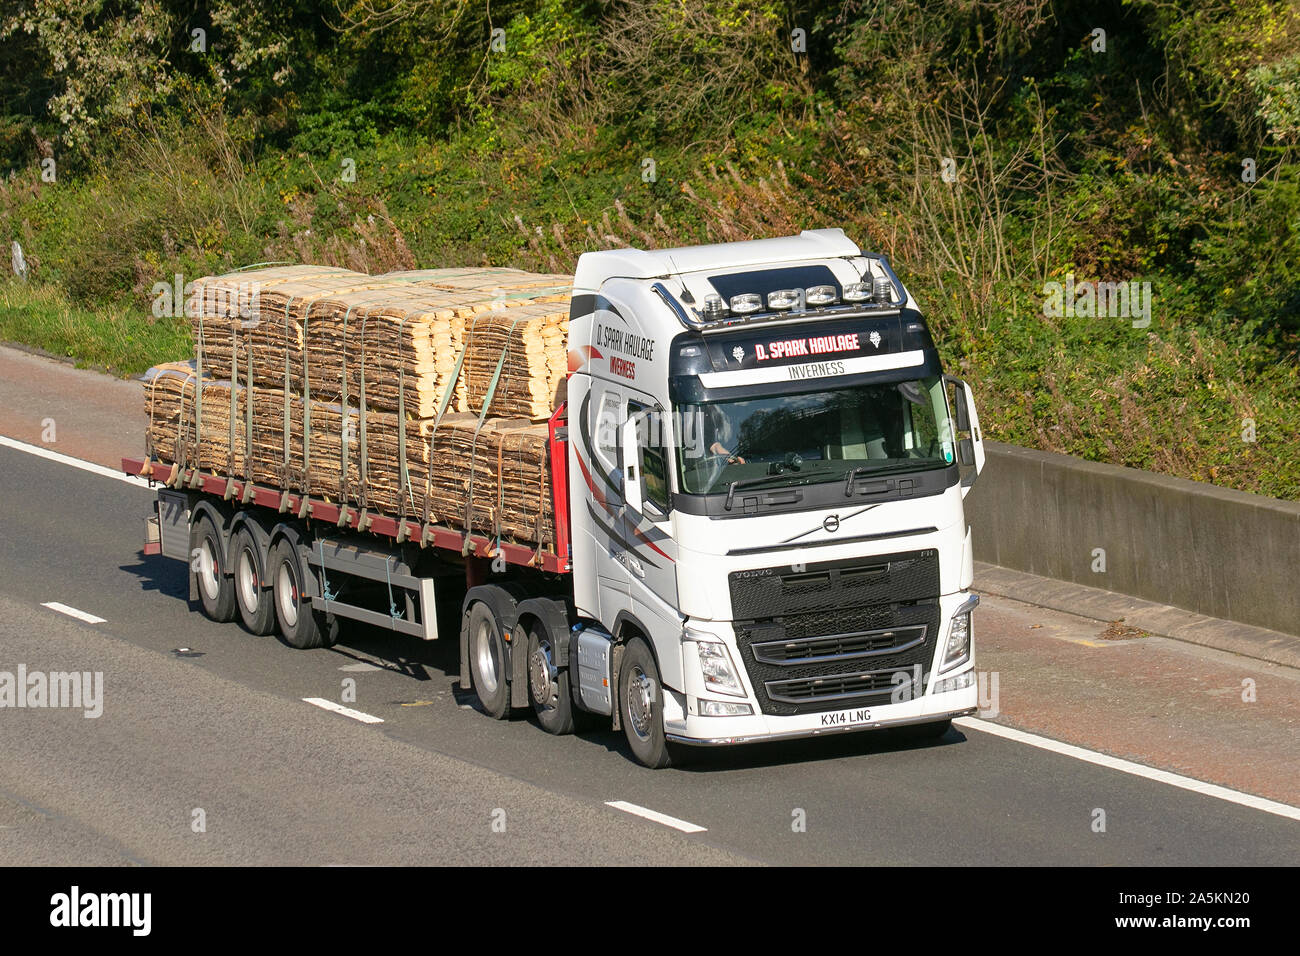 D Spark Haulage (Inverness); wood products delivery trucks, timber lorry, transportation, truck, cut timber cargo, Volvo vehicle, delivery, commercial transport, industry, Scottish supply chain freight, on the M6 at Lancaster, UK Stock Photo